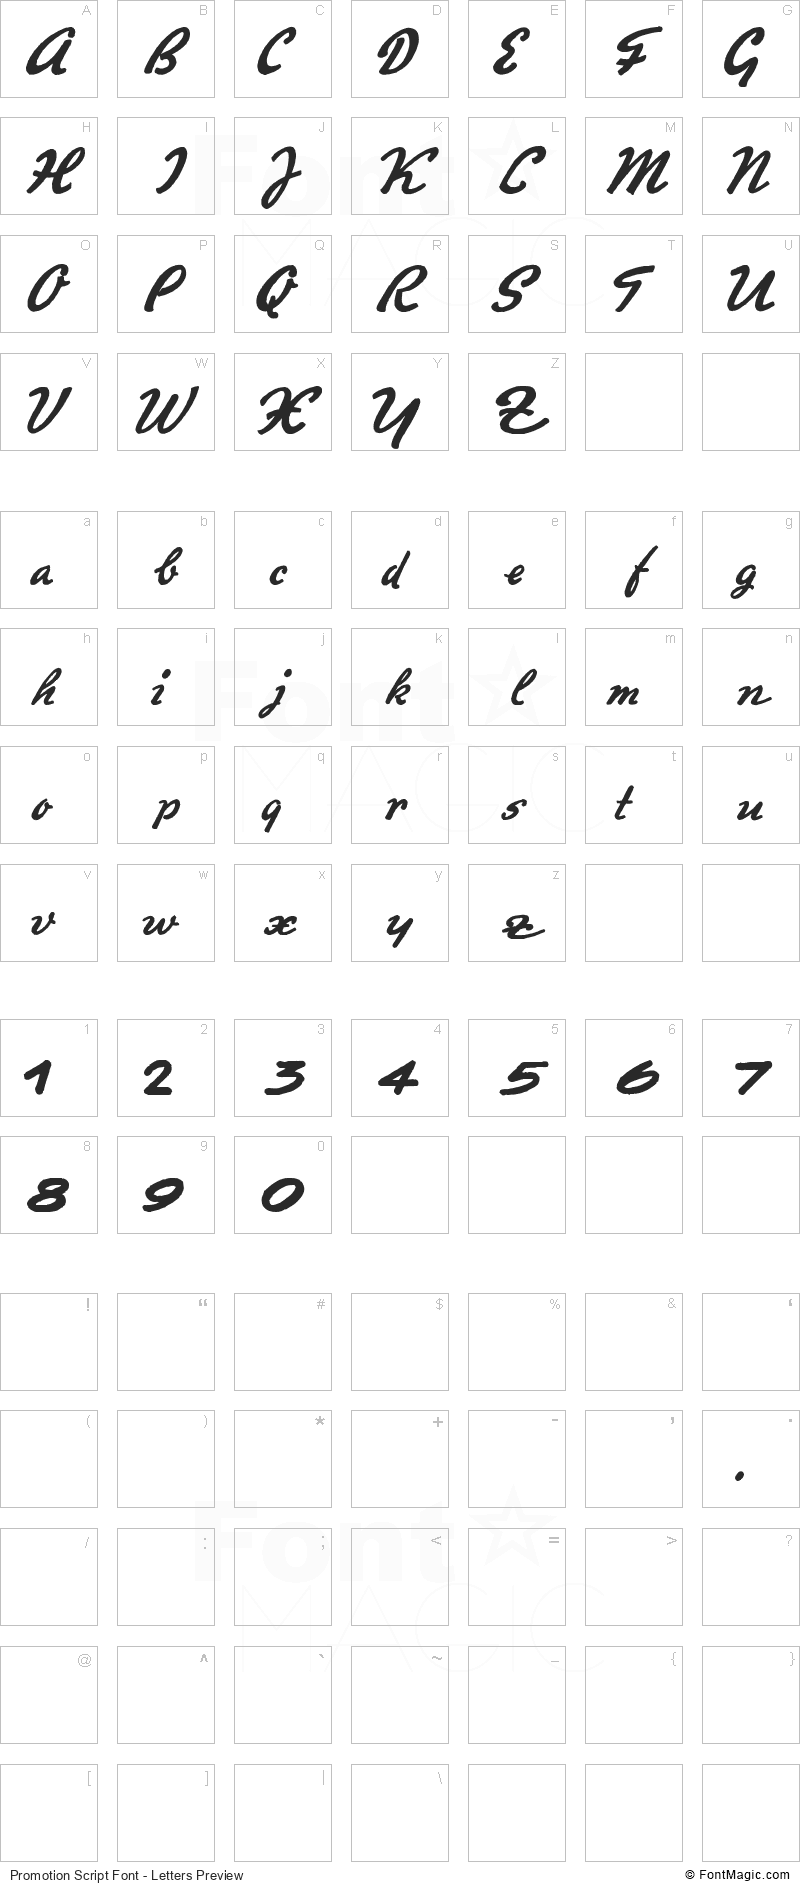 Promotion Script Font - All Latters Preview Chart